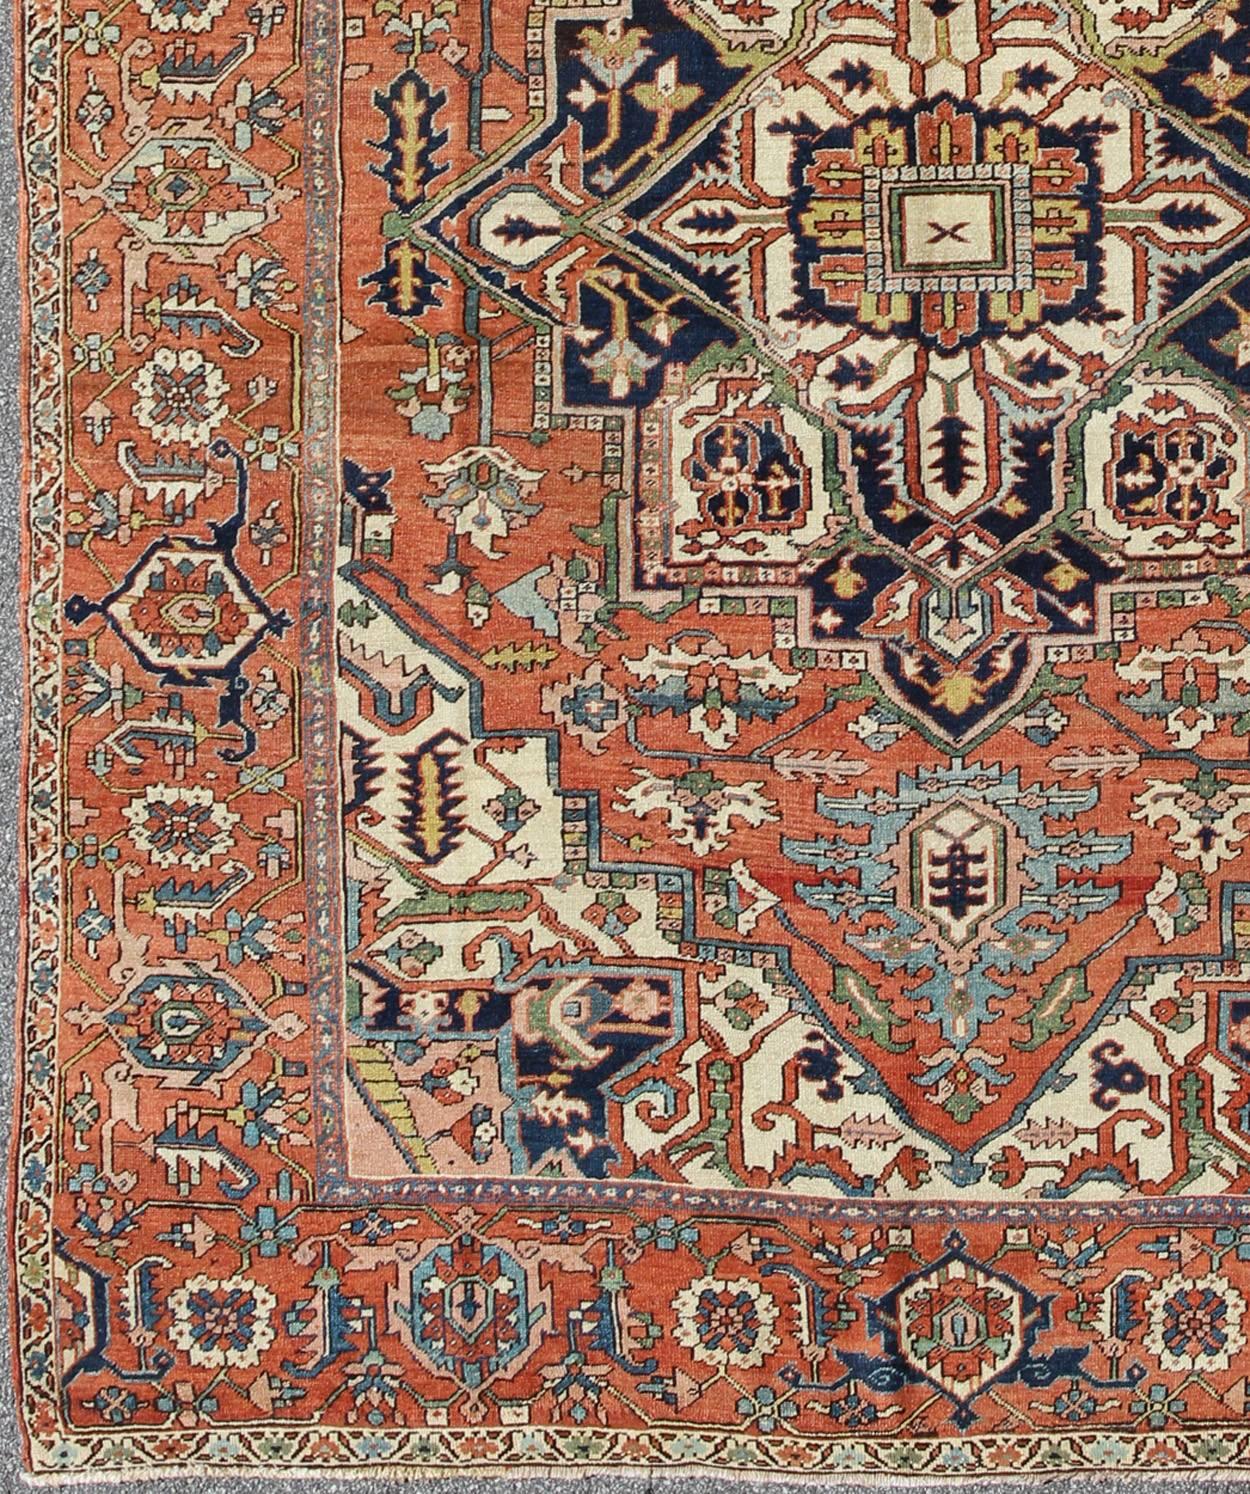 Antique Persian Serapi rug with bold medallion in orange, navy blue and green. kwarugs / S12-0201. This magnificent antique Persian Serapi from the late 19th century bears an exquisite design rendered in gorgeous, warm hues of rust, green, and denim